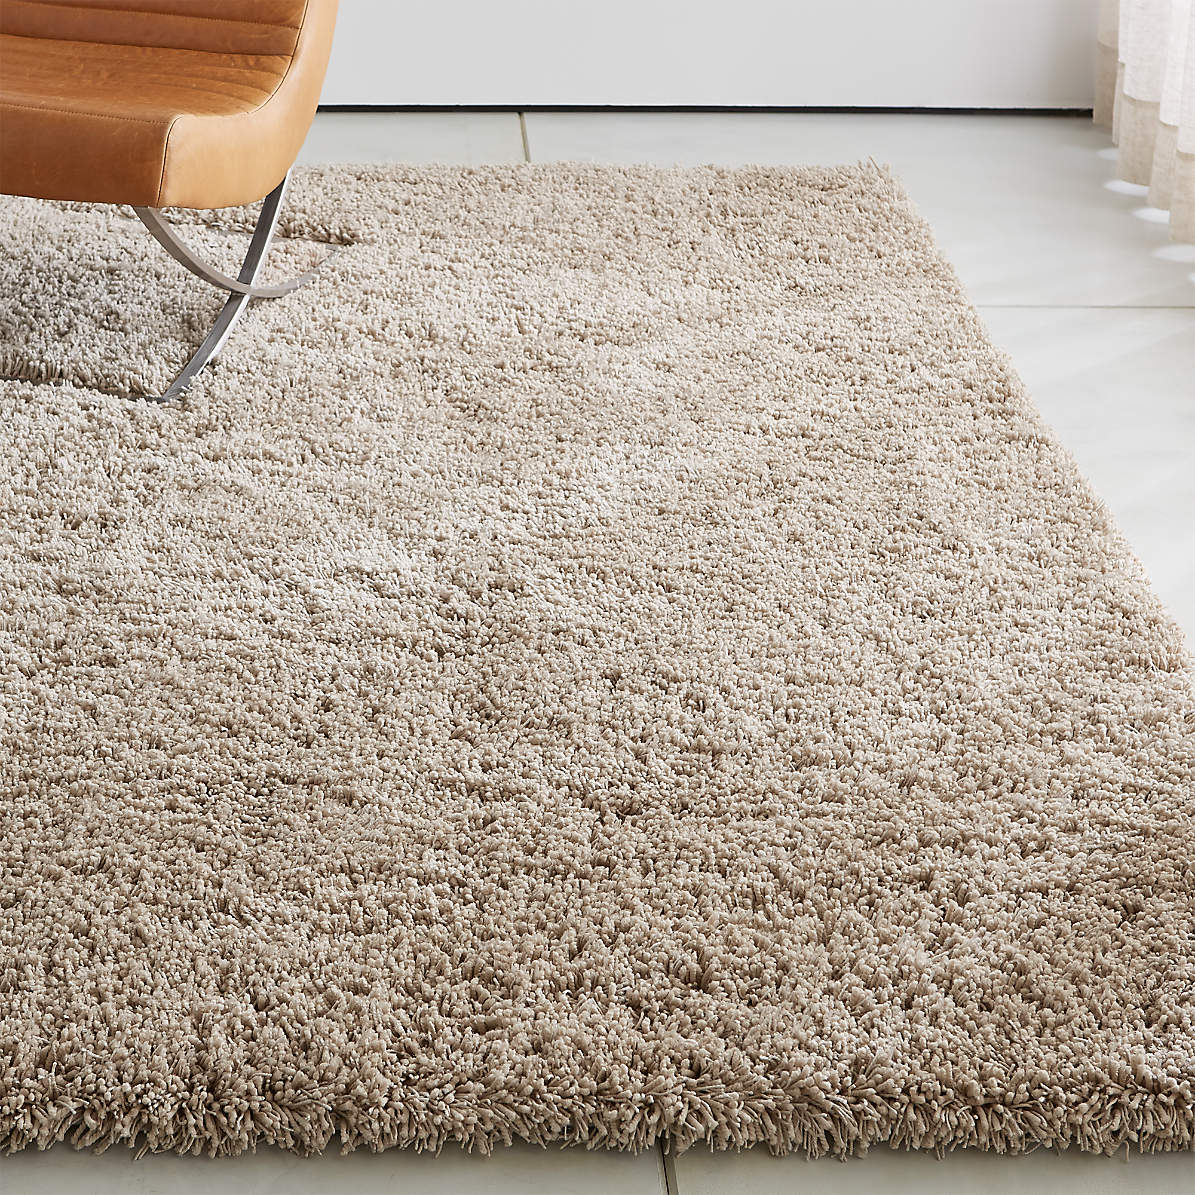 Memphis Stone Natural Rug Crate, Crate And Barrel Rugs